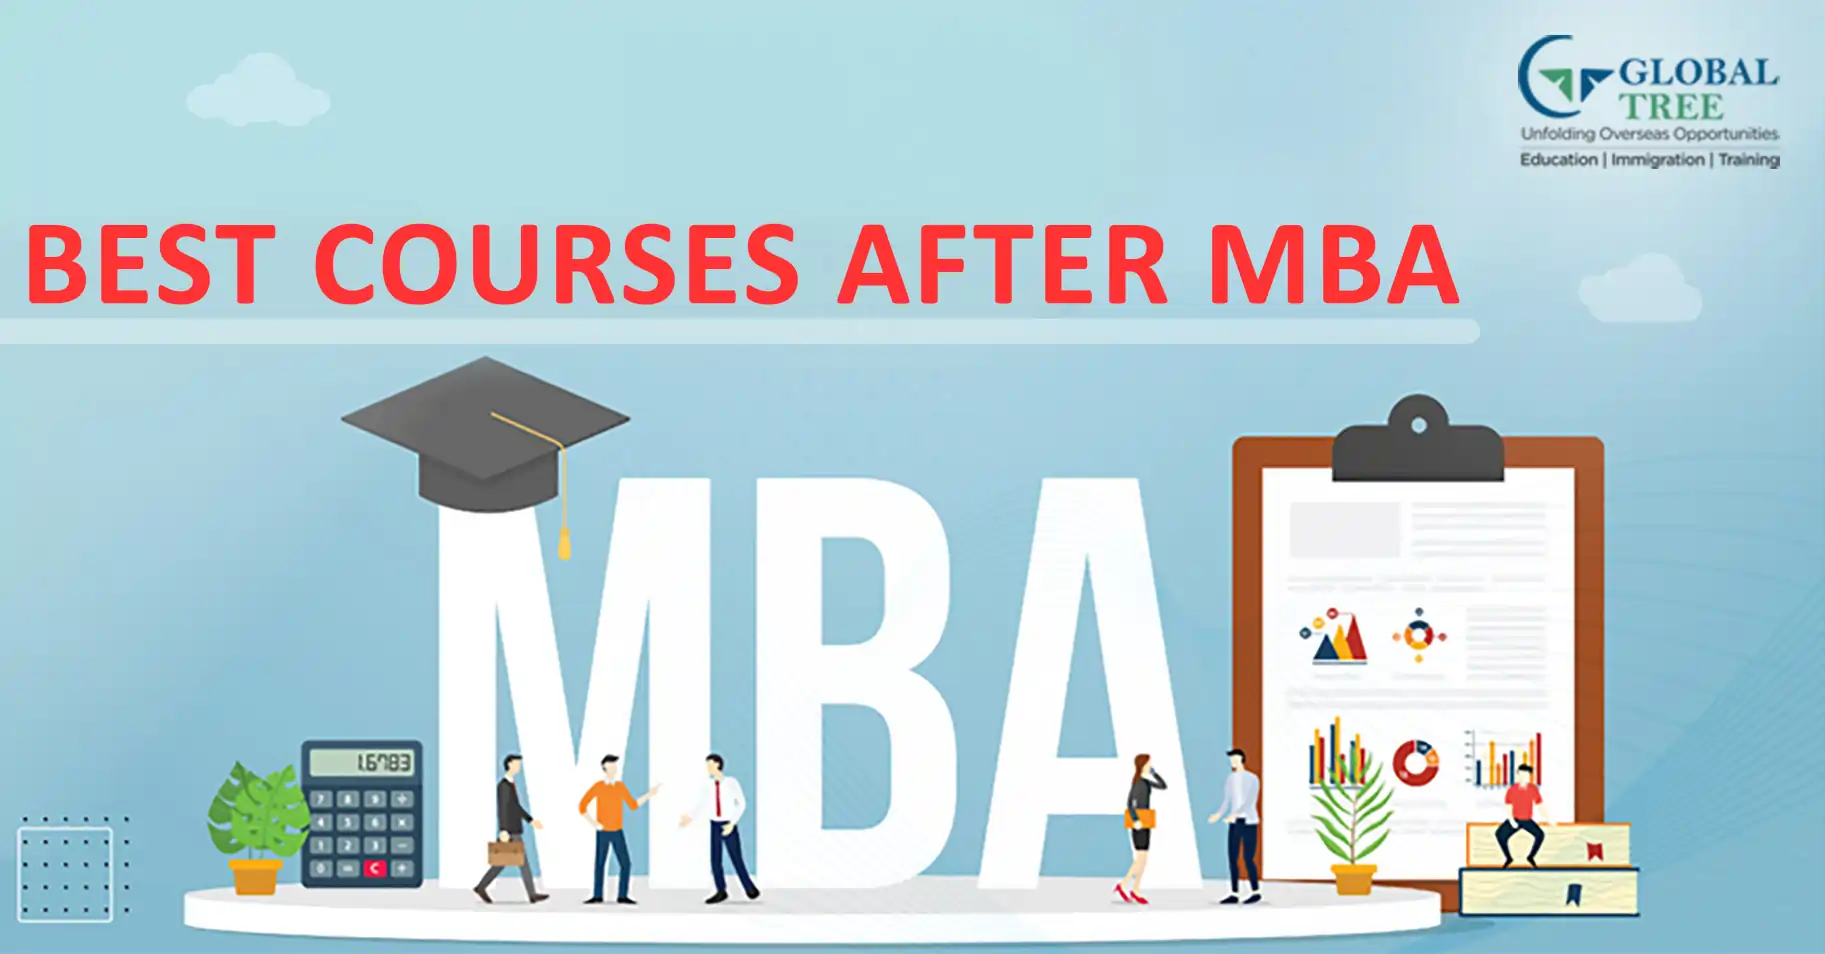 17 Best Courses After MBA: Exploring Lucrative Career Paths Abroad